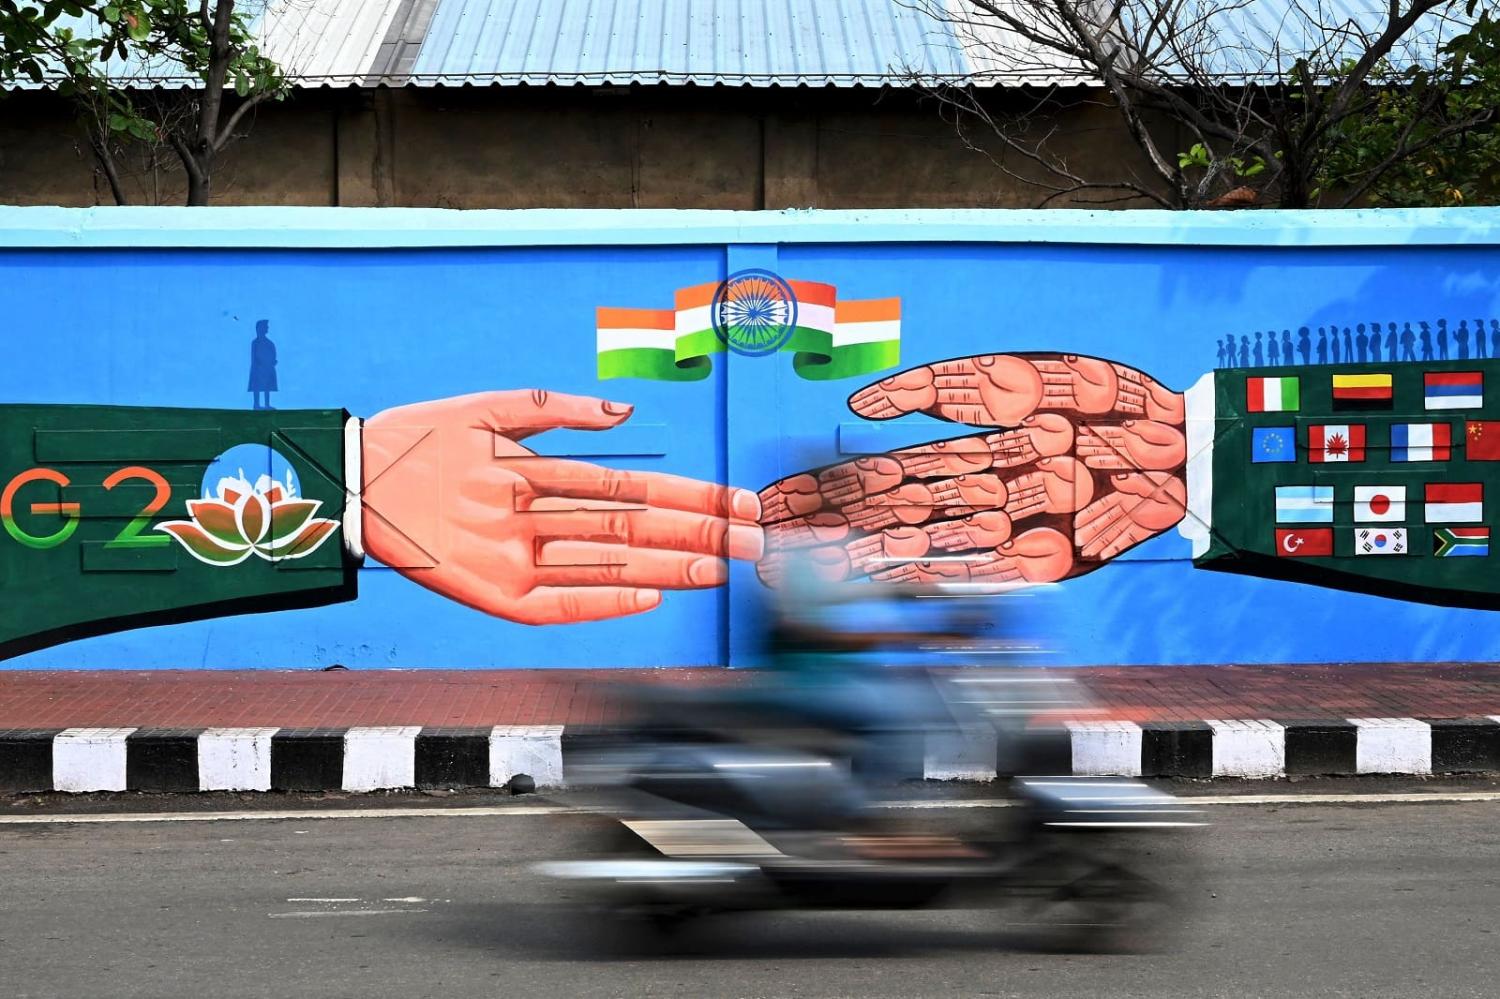 A commuter rides past a G20 Summit mural in Visakhapatnam on 20 March 2023 (Noah Seelam/AFP via Getty Images)